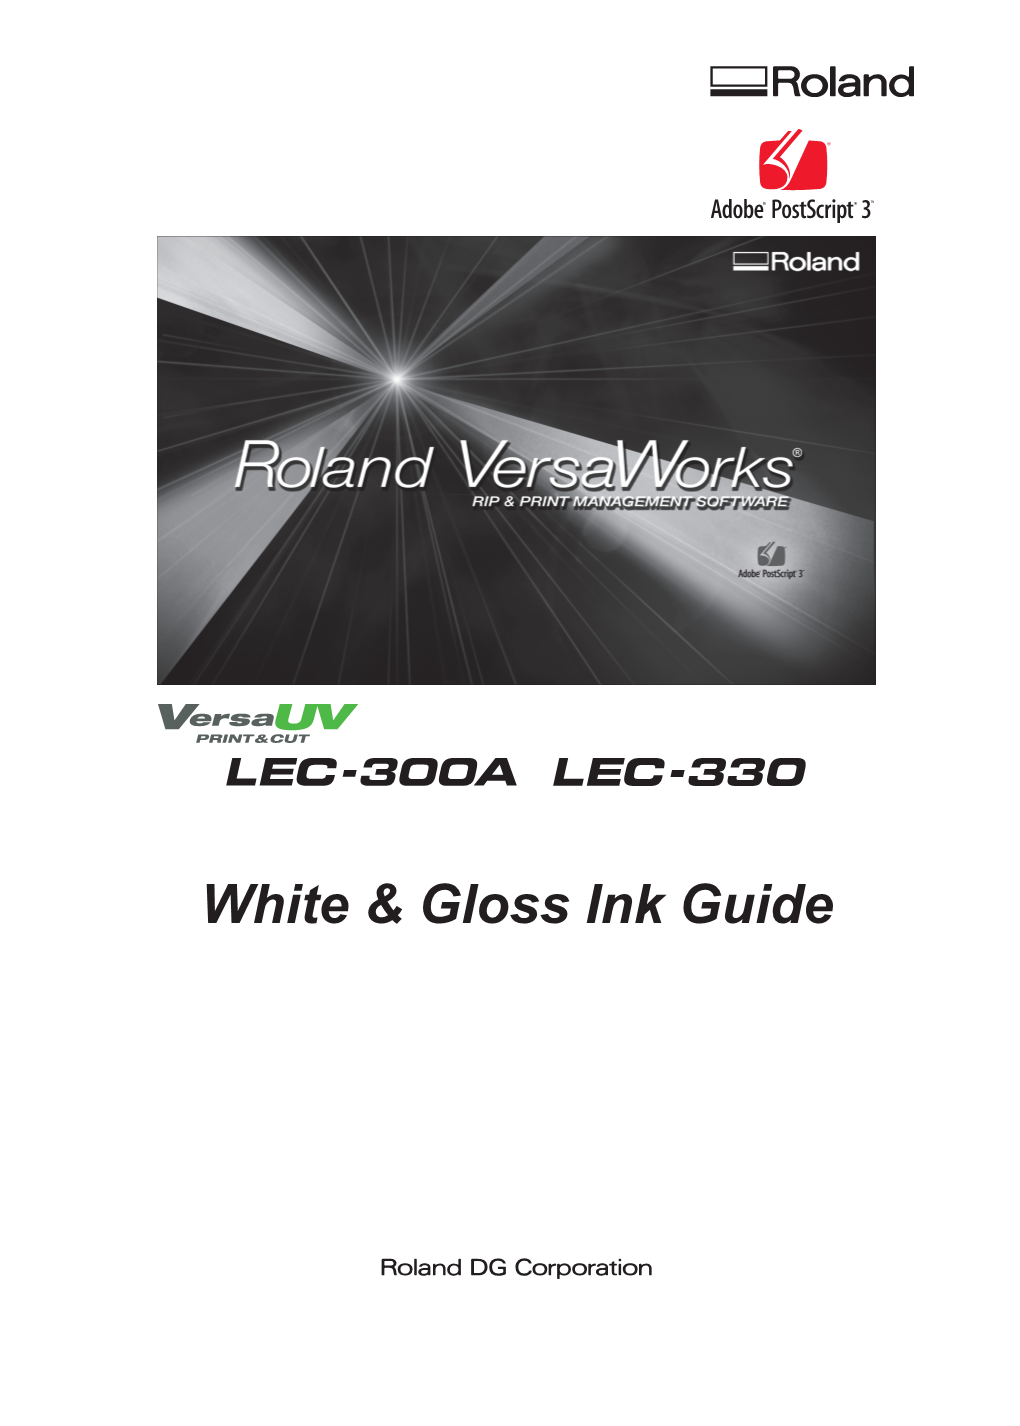 White & Gloss Ink Guide